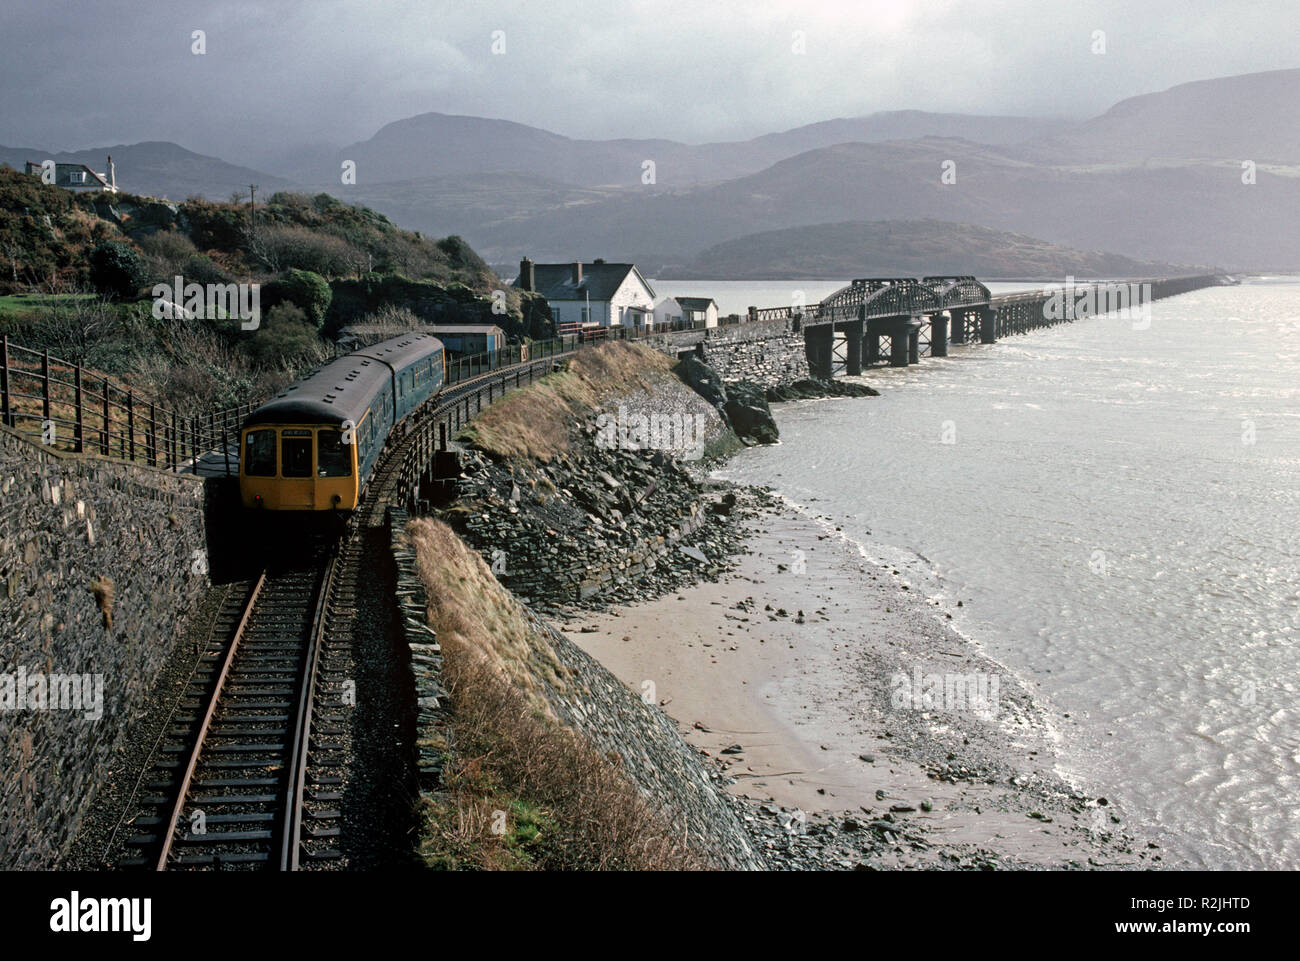 British Rail Diesel Multiple Unit, DMU, train on the Dovey Junction to Pwllheli Cambrian Coast railway line, Barmouth Bridge over River Mawddach, Mid Wales, Great Britain Stock Photo